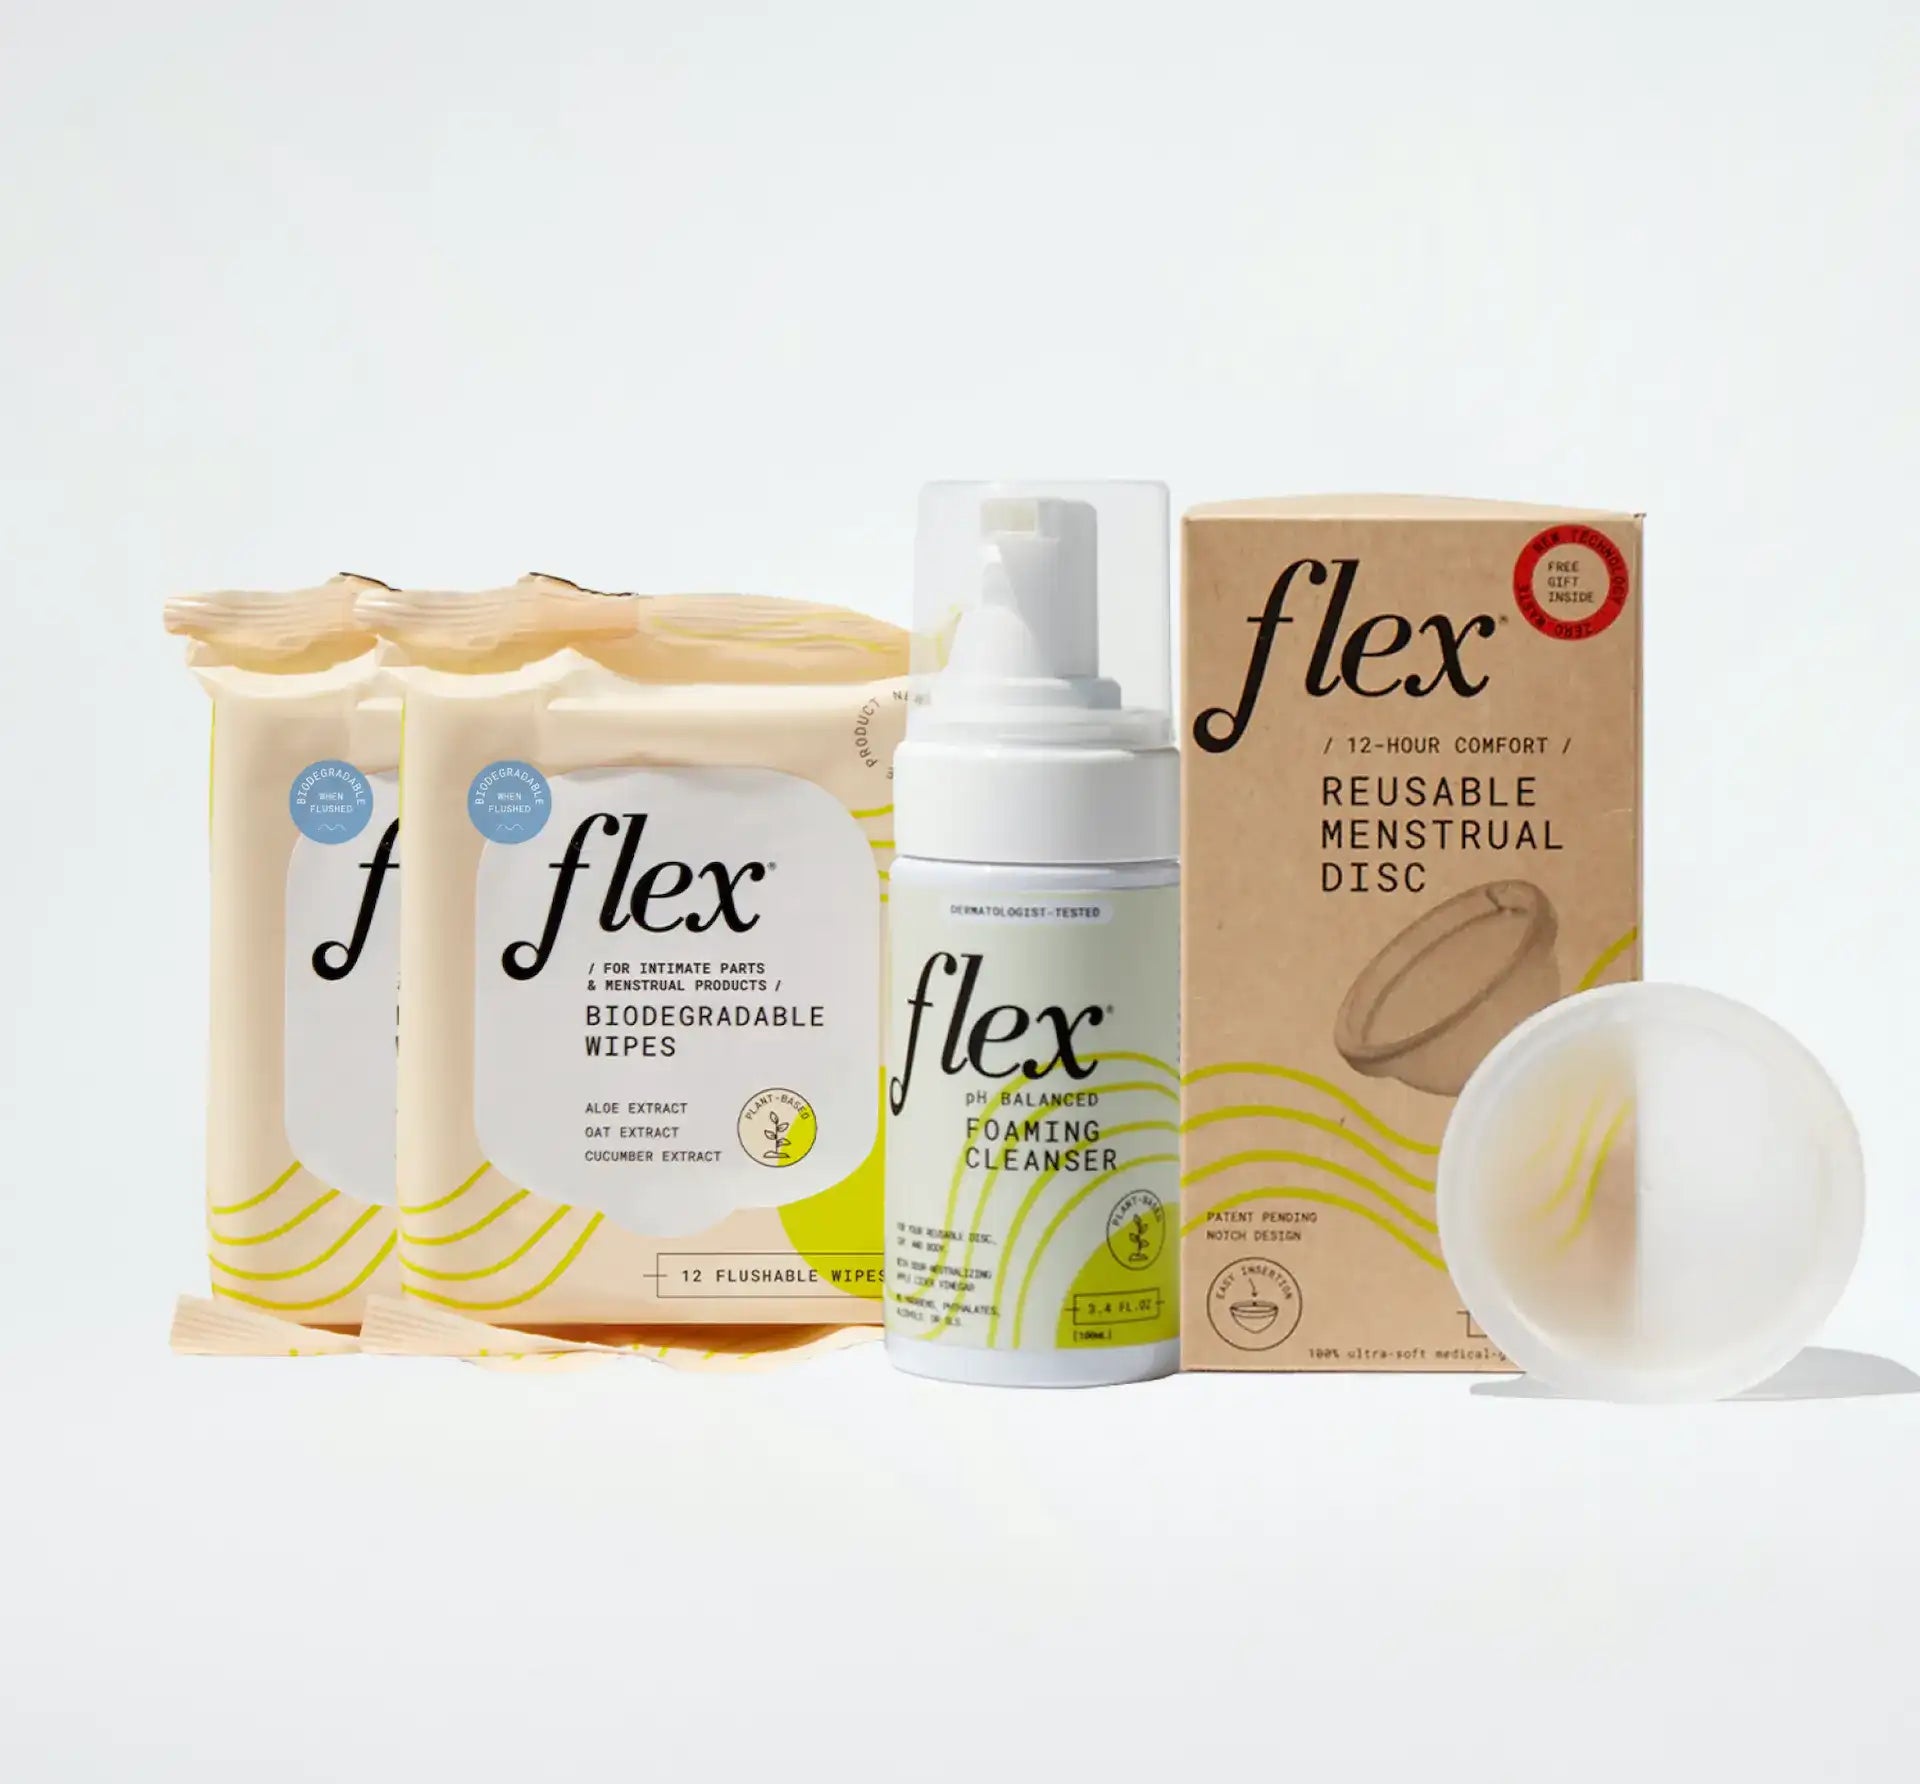 The Flex products available for purchase in this bundle.